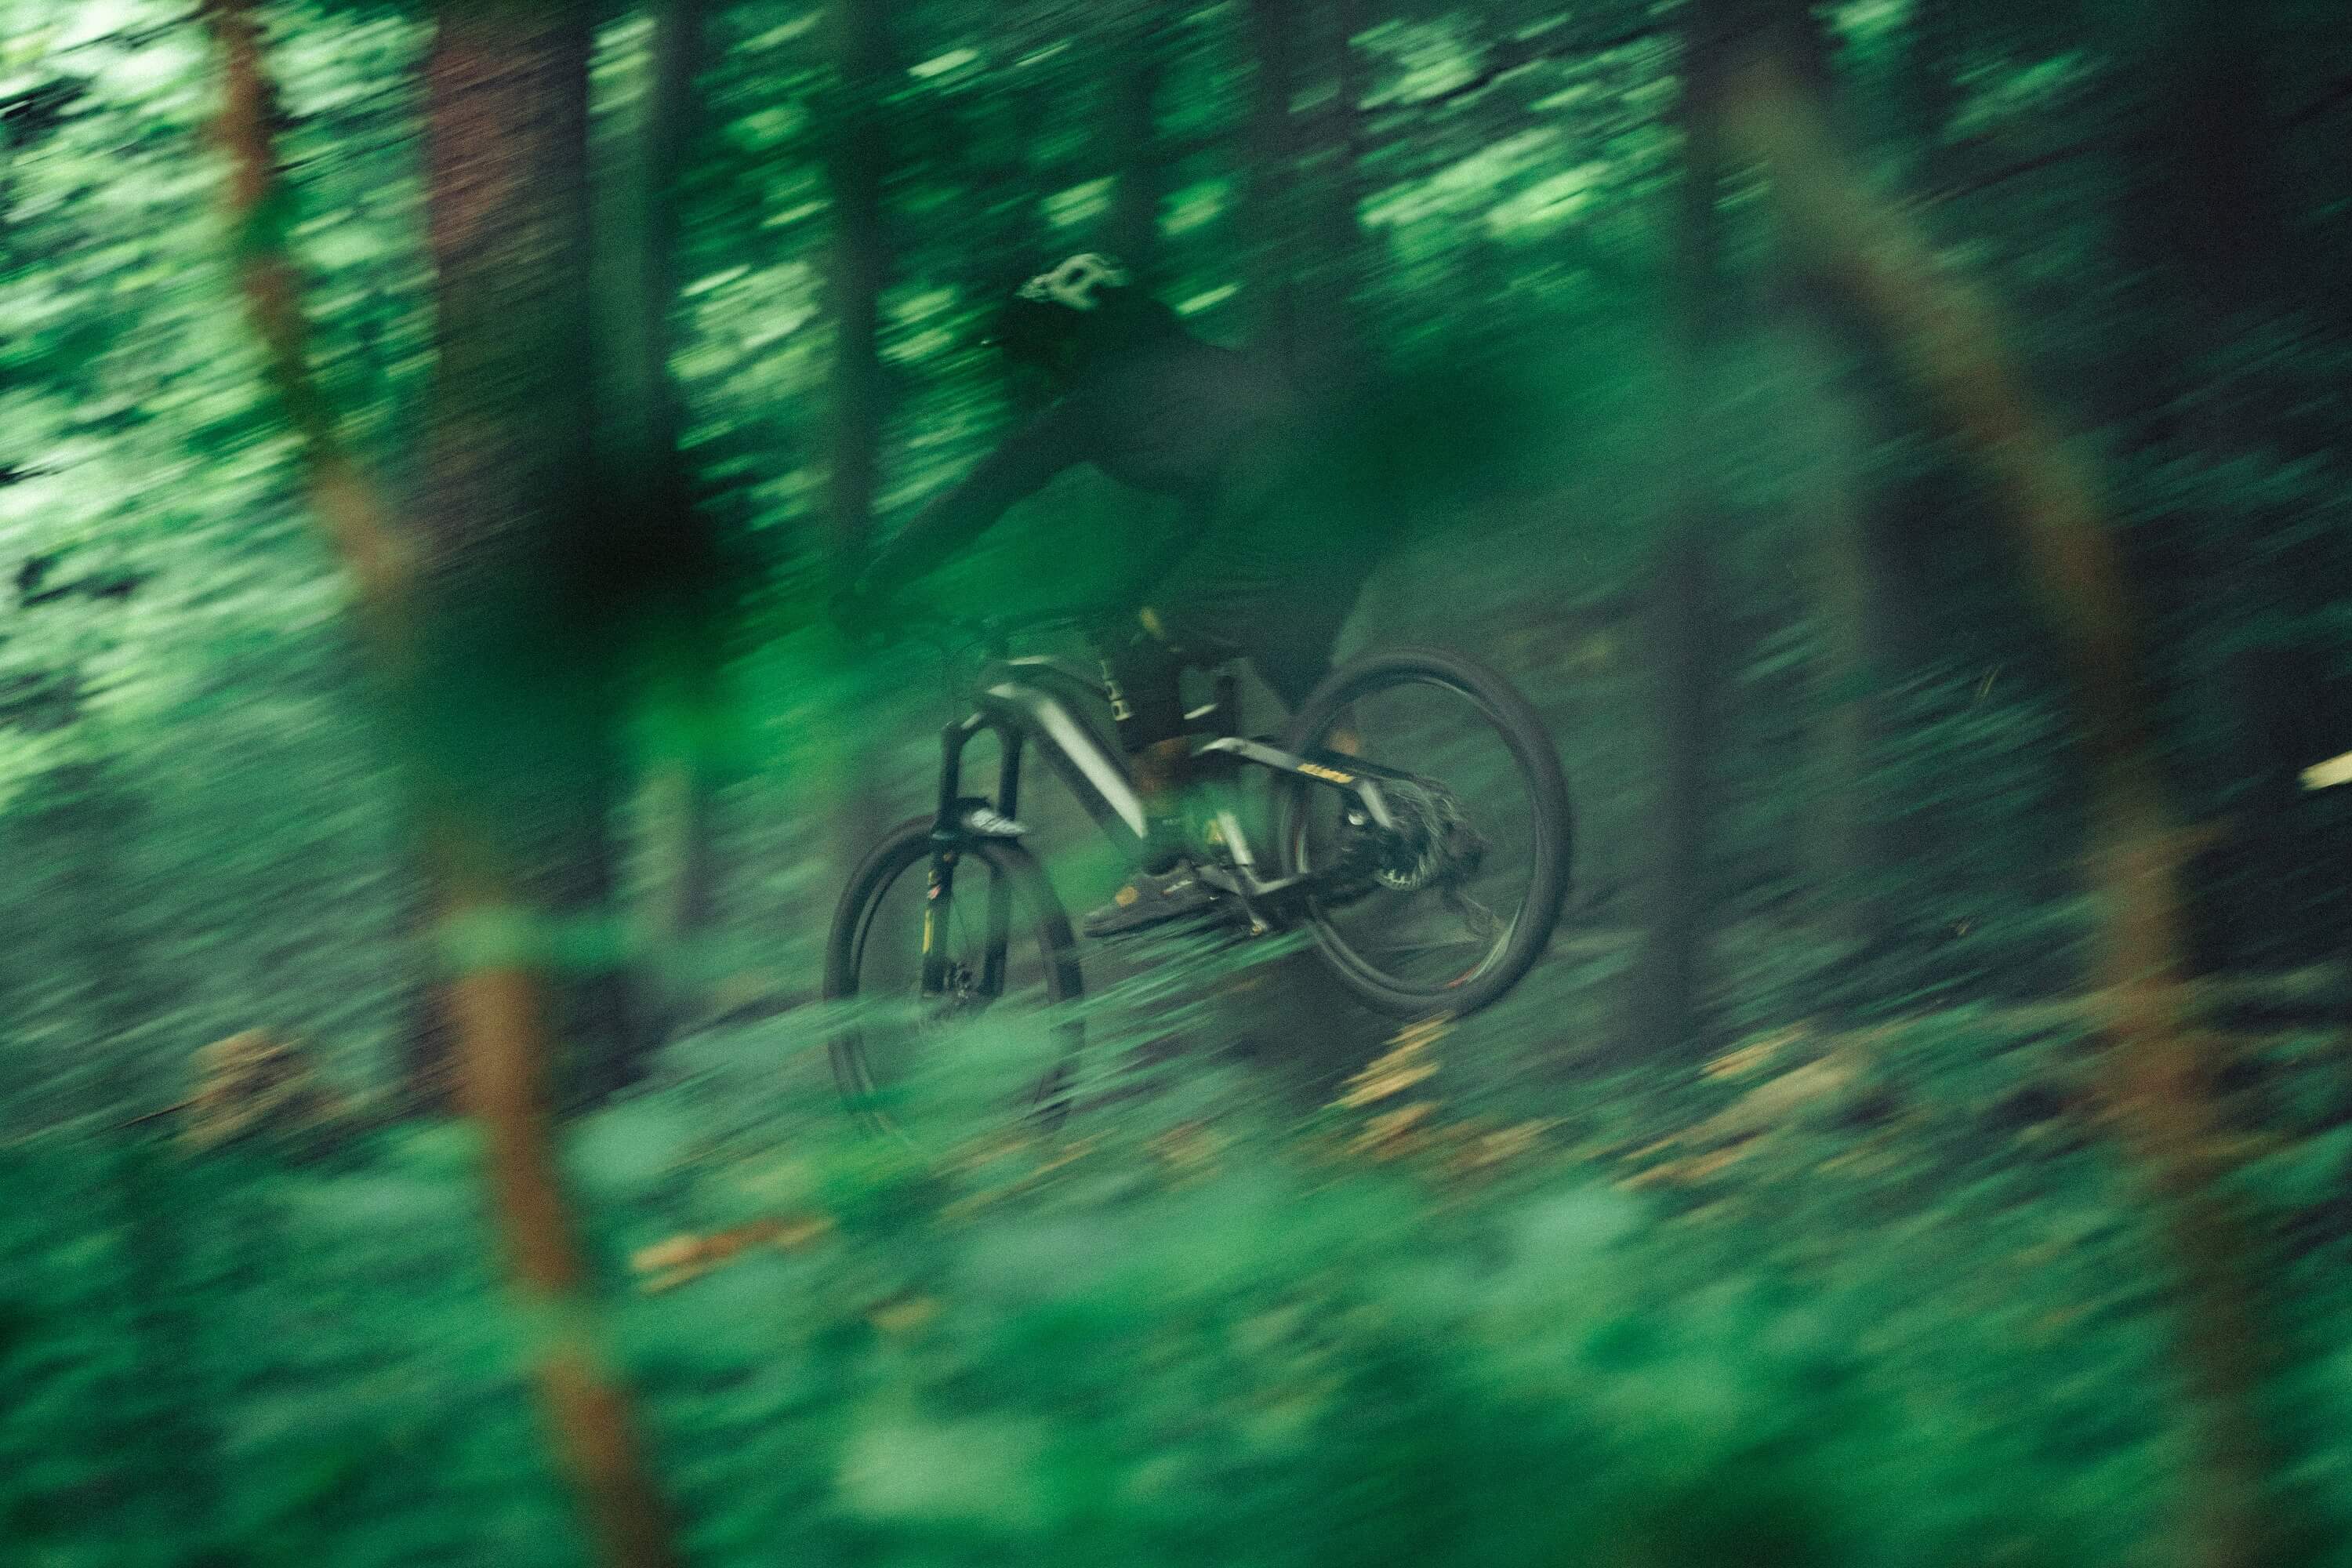 Someone riding fast through the woods on their Haibike AllMtn SE eMTB